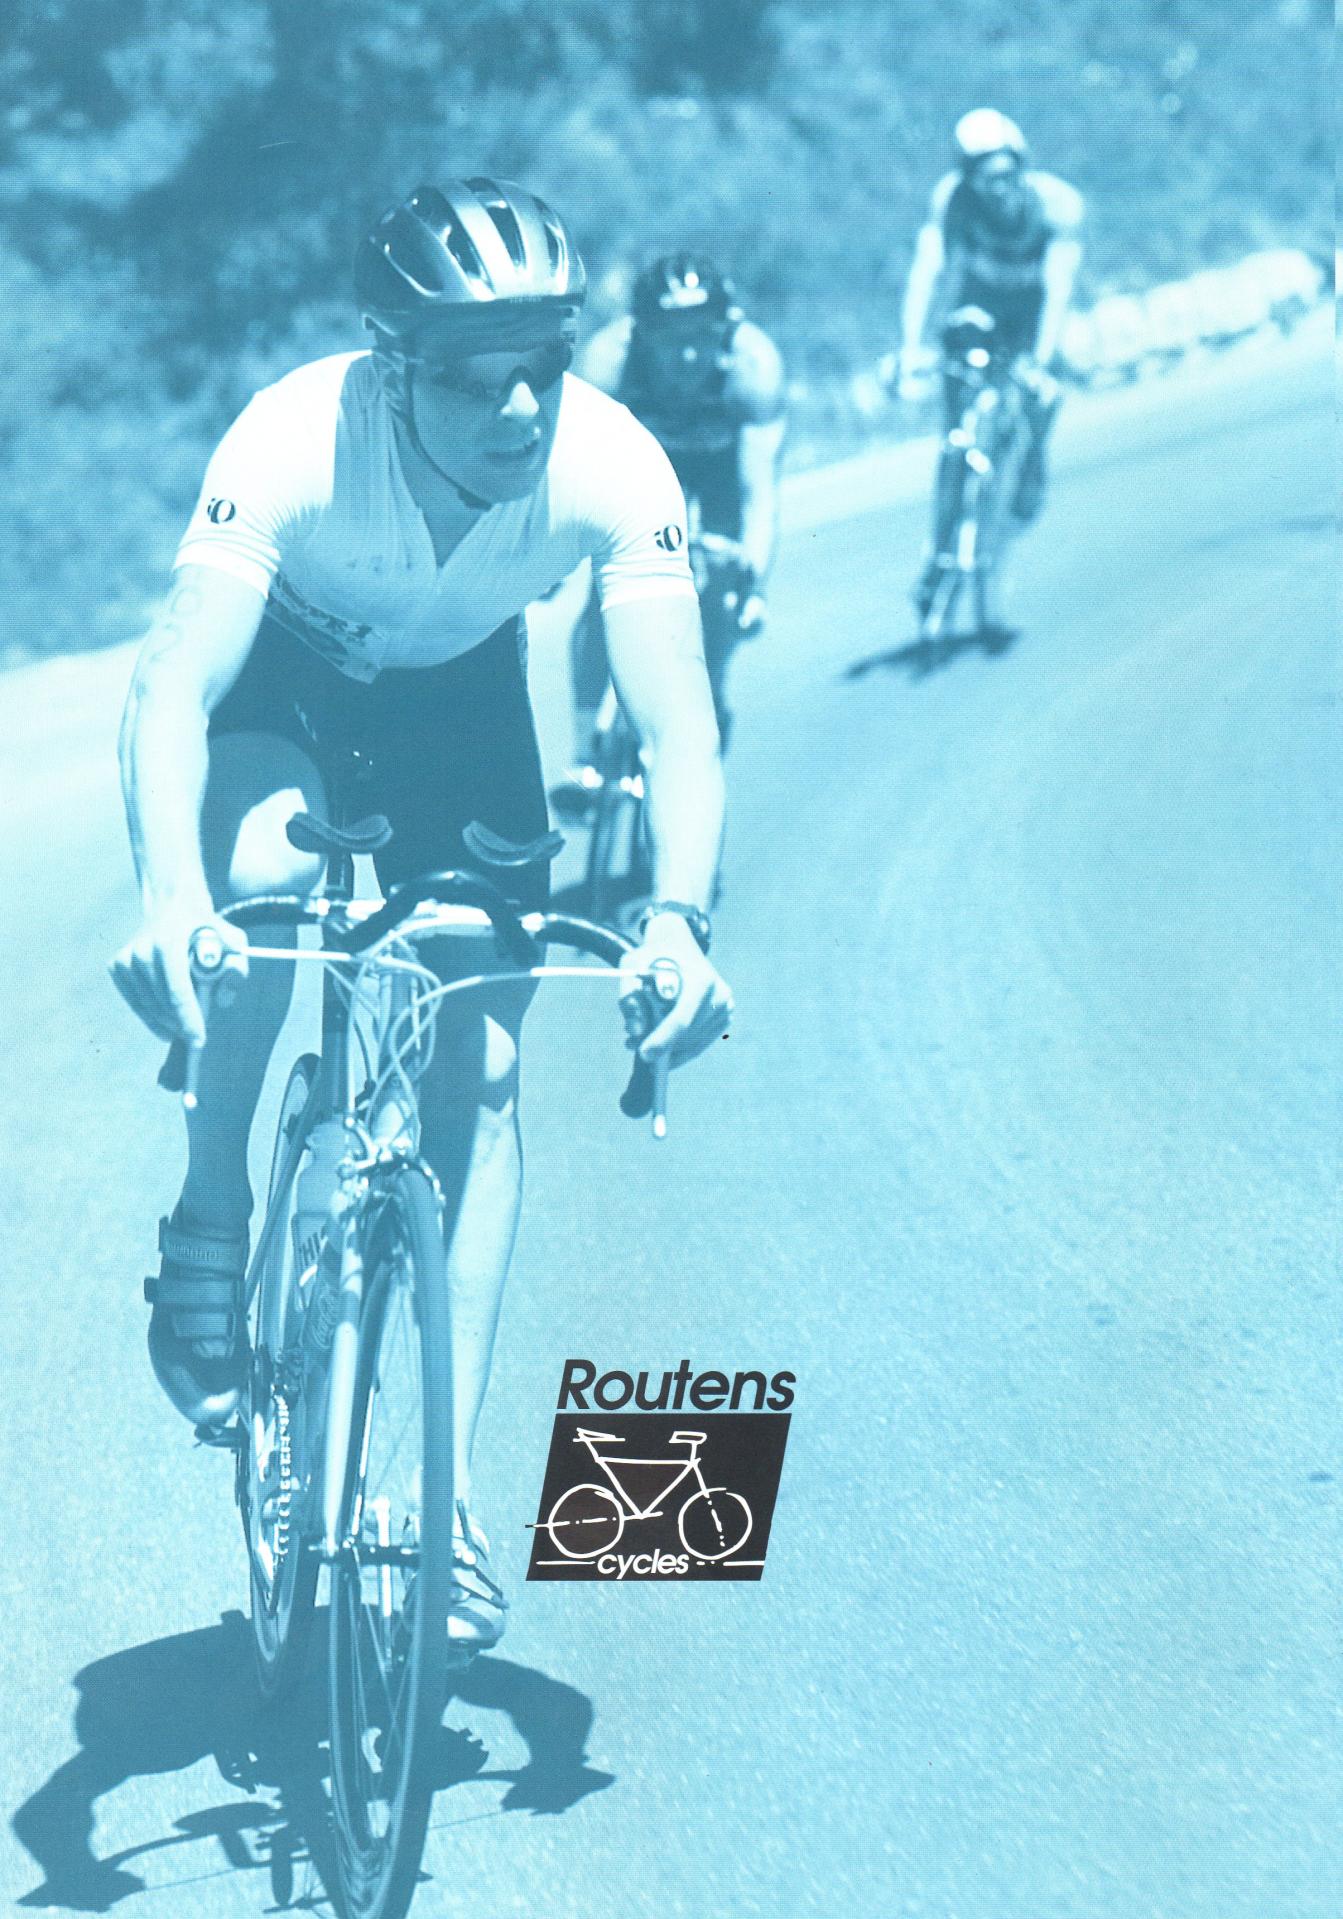 Routens cycles catalogue 1994 1